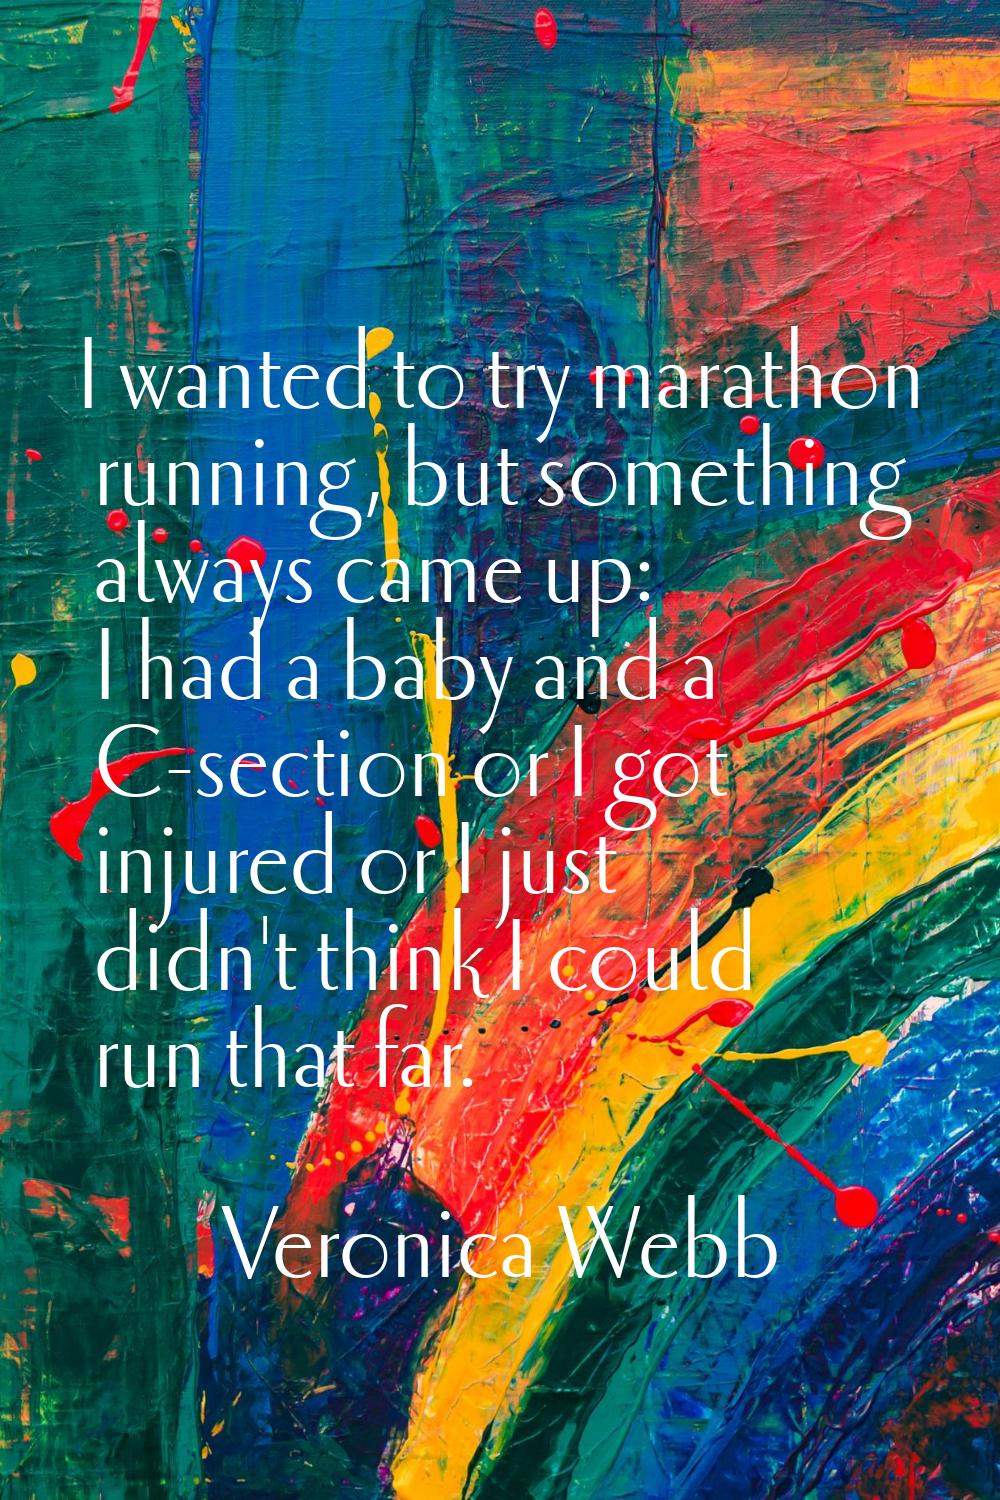 I wanted to try marathon running, but something always came up: I had a baby and a C-section or I g